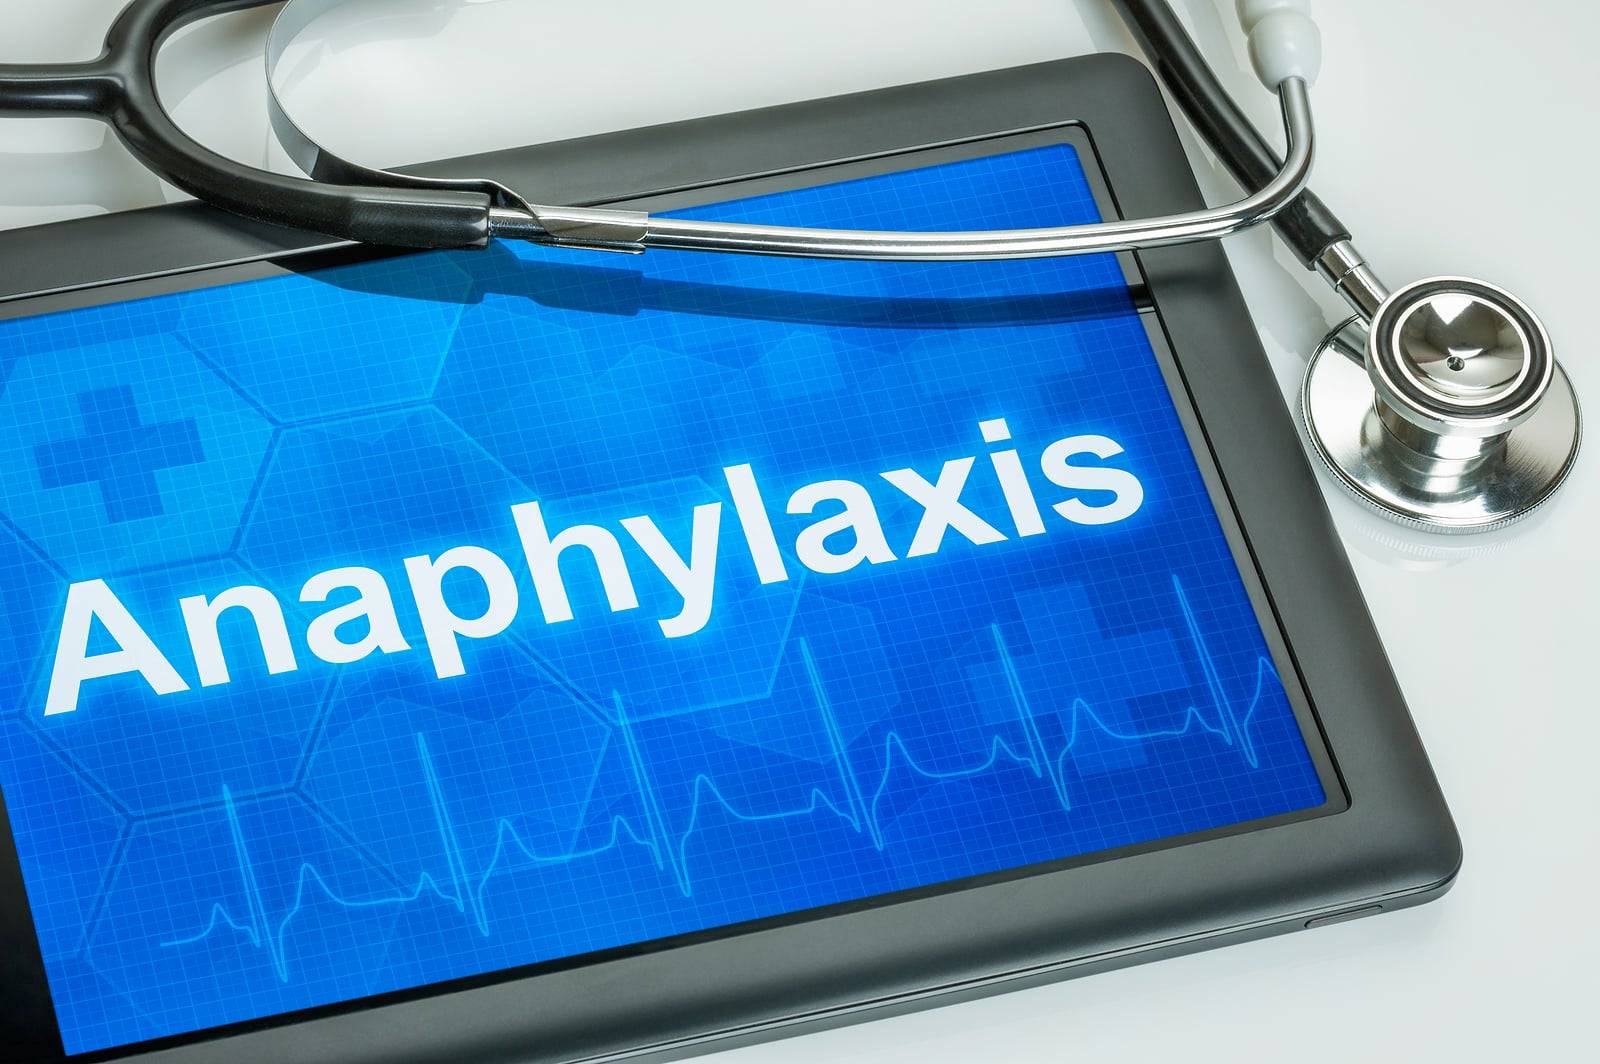 Anaphylaxis, Does Your Restaurant Consider Food Allergies? If Not, You Had Better